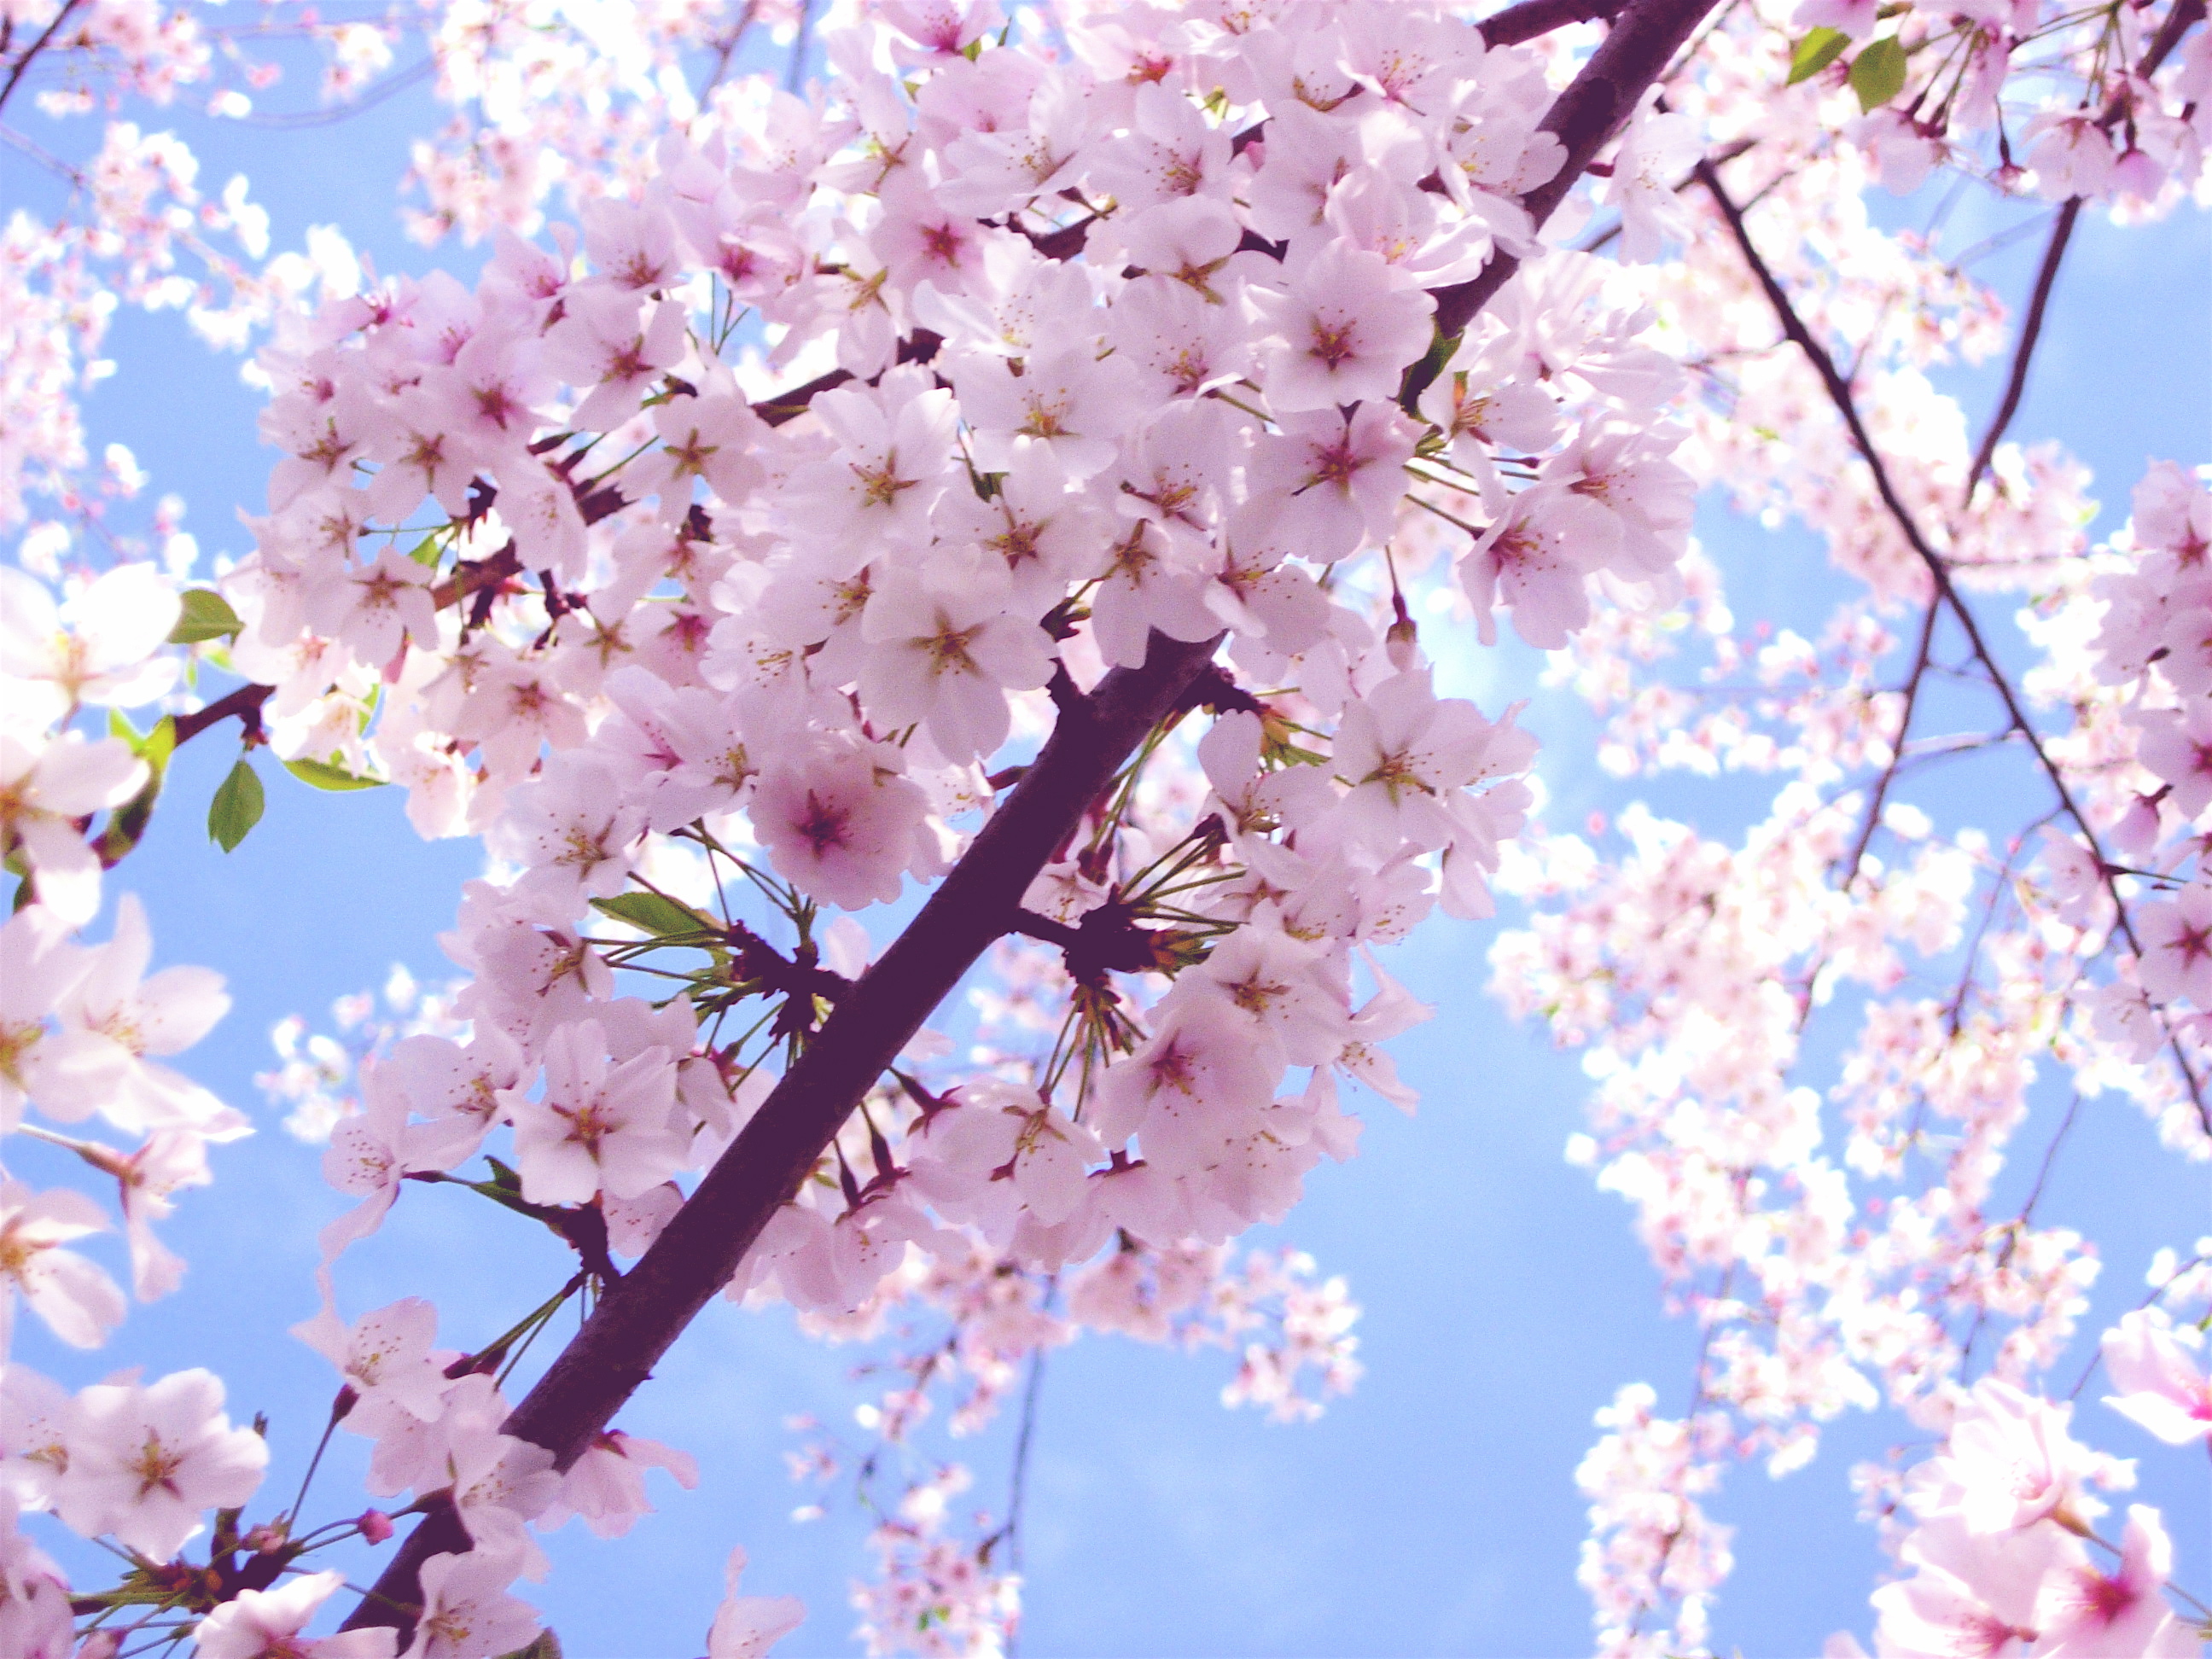 Pink Color Image Blooming Cherry Blossom HD Wallpaper And